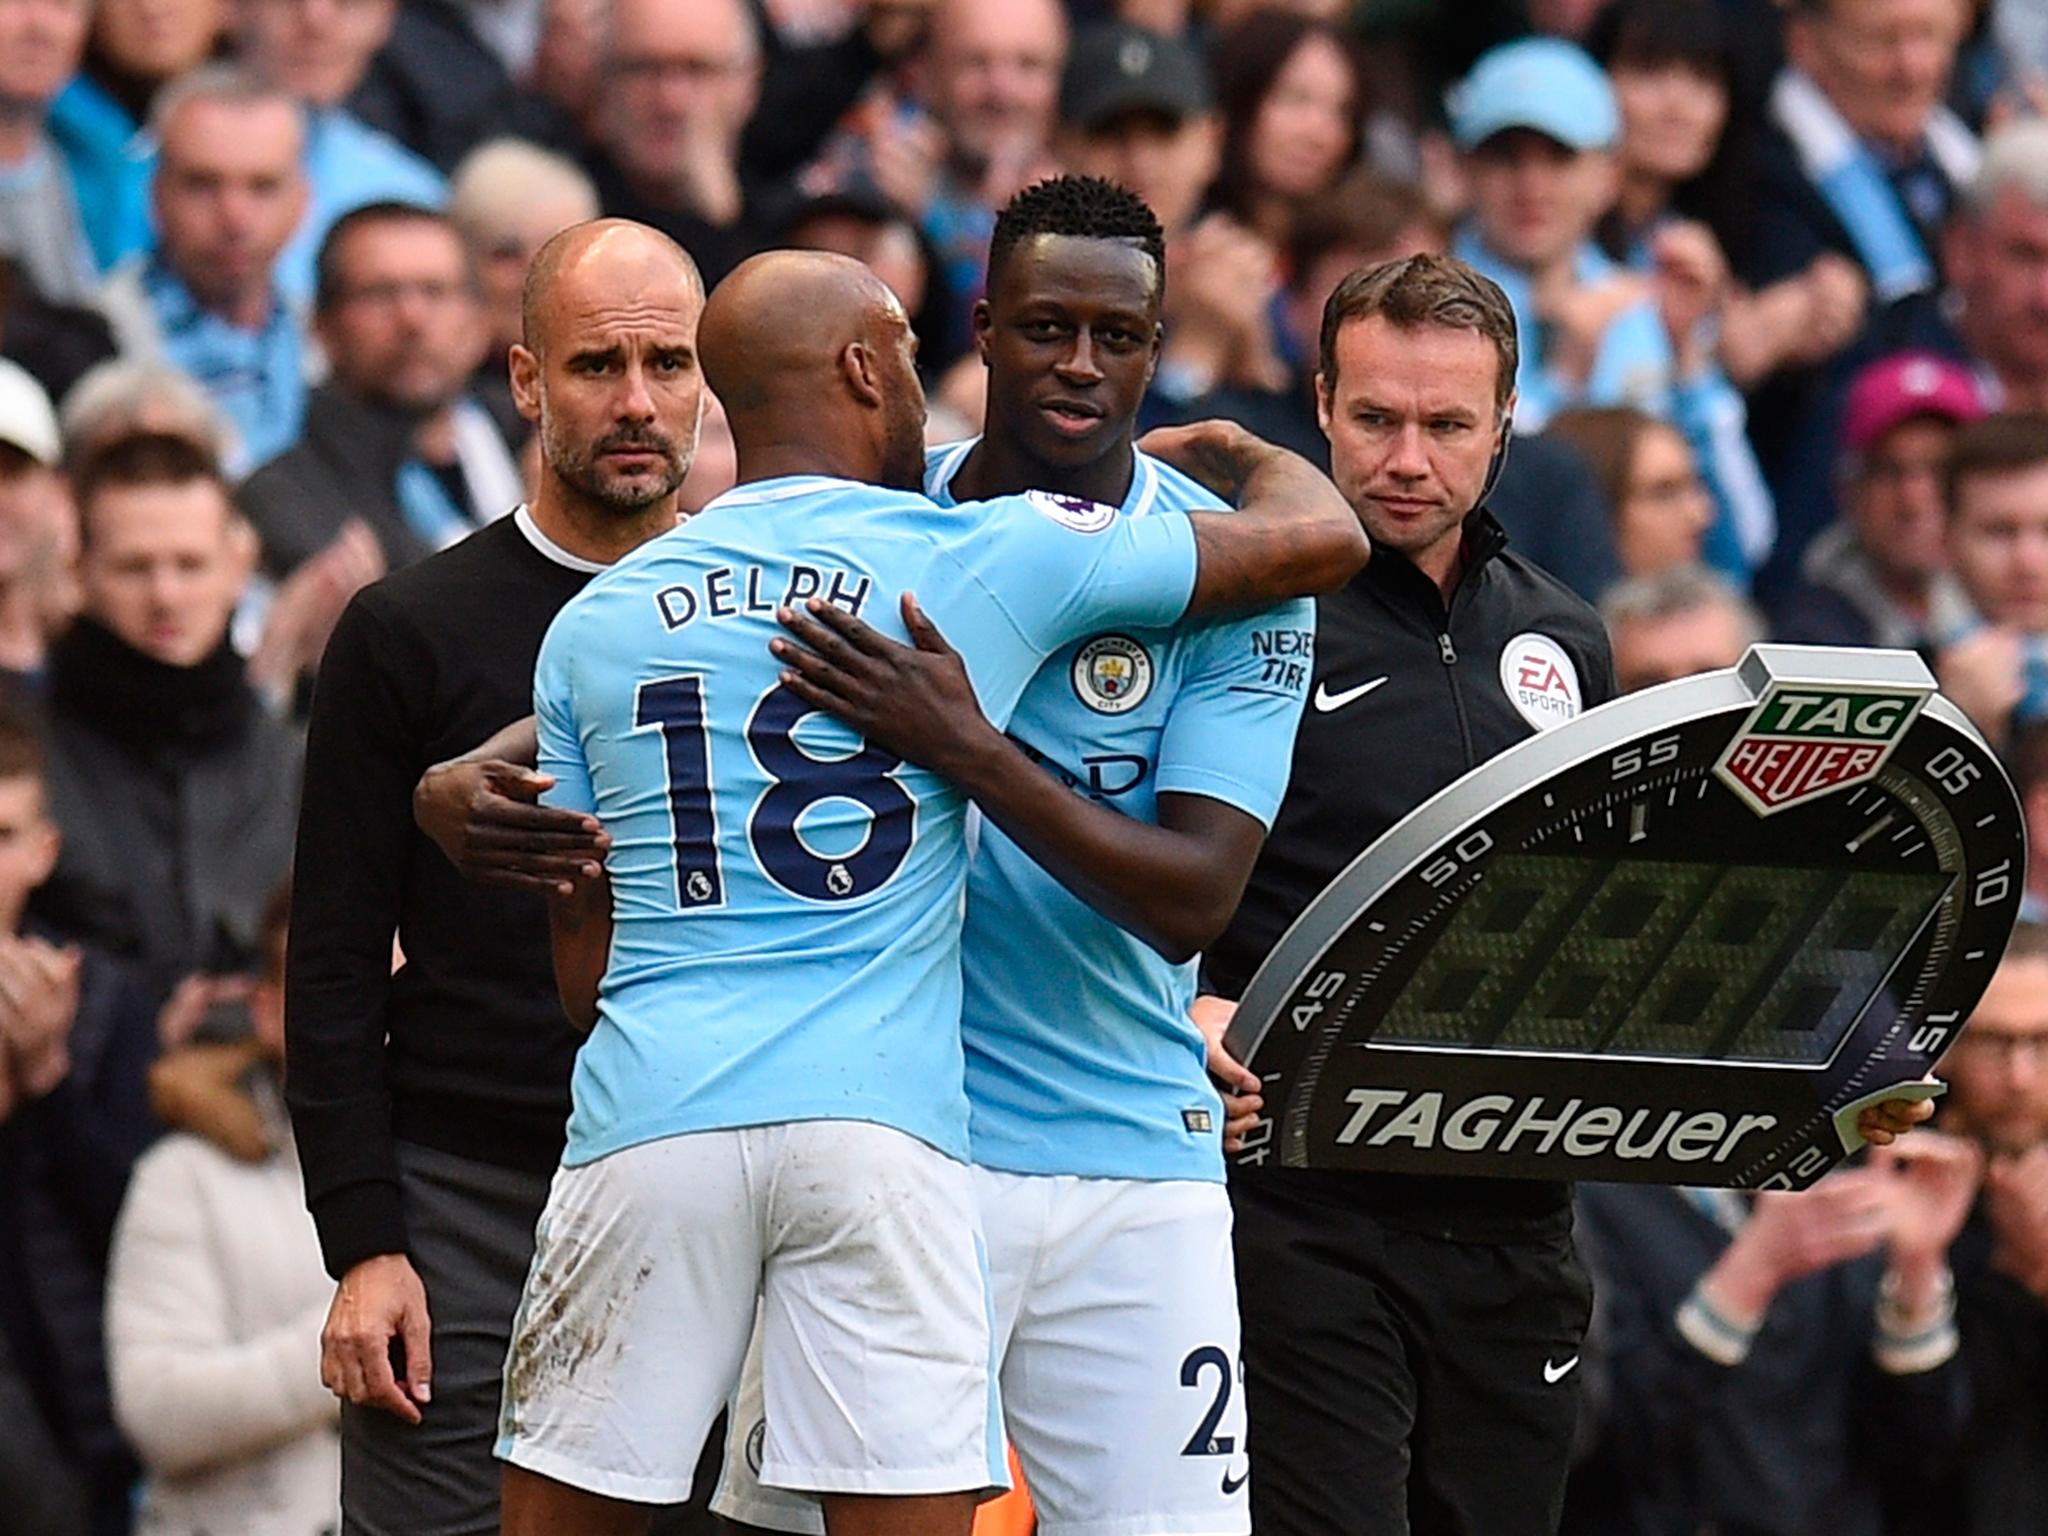 Mendy returned to City's team after an extended period out